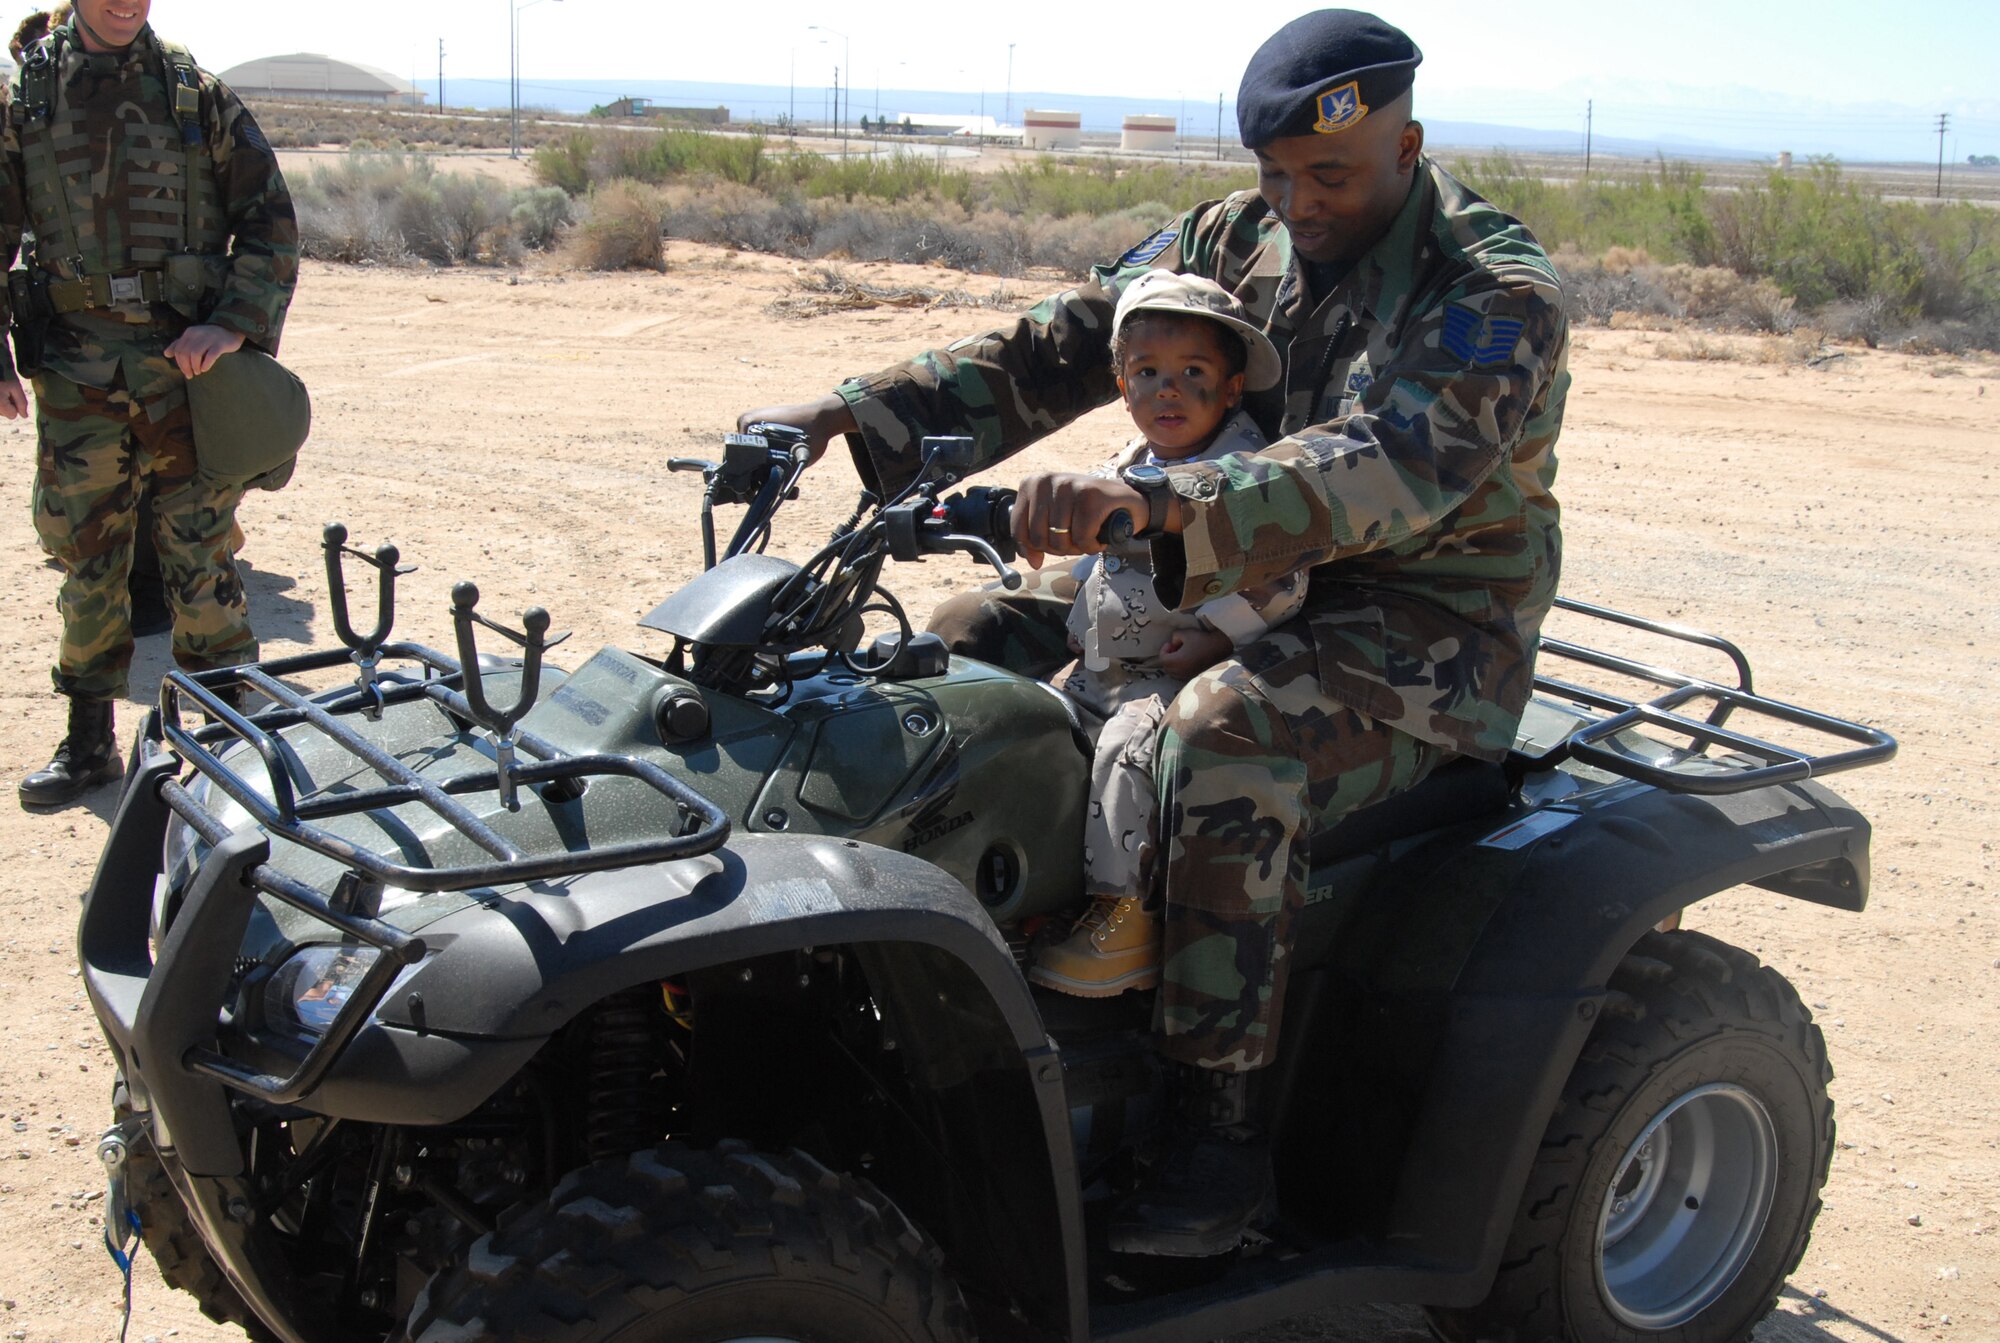 Tech. Sgt. Robert Tucker, 95th Security Forces Squadron police services noncommissioned officer in charge, assists his 1-year-old son, Christian, on an all-terrain vehicle during Operation KUDOS at the Oasis Community Center on Saturday. Operation KUDOS, or Kids Understanding Deployment Operations, is geared to provide Edwards children the opportunity to process through deployment lines and "deploy." (Photo by Airman Mikeal A. Young)